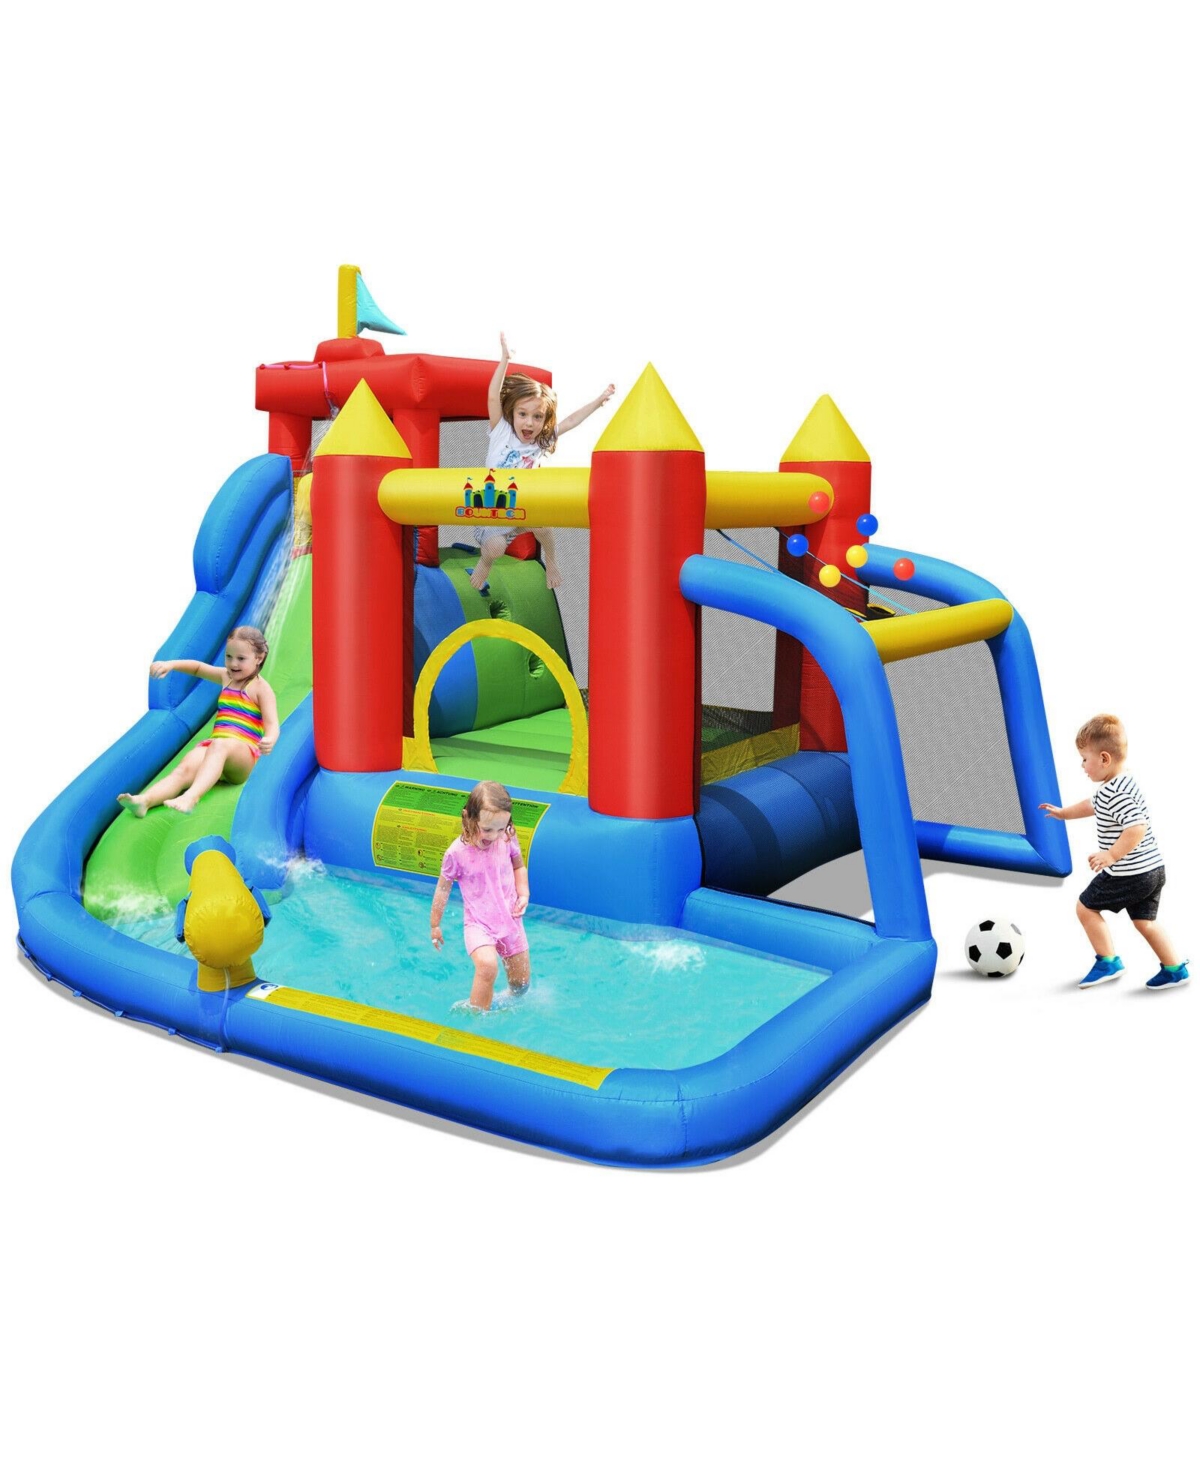 Inflatable Bouncer Bounce House with Water Slide Splash Pool without Blower - Open Miscellaneous